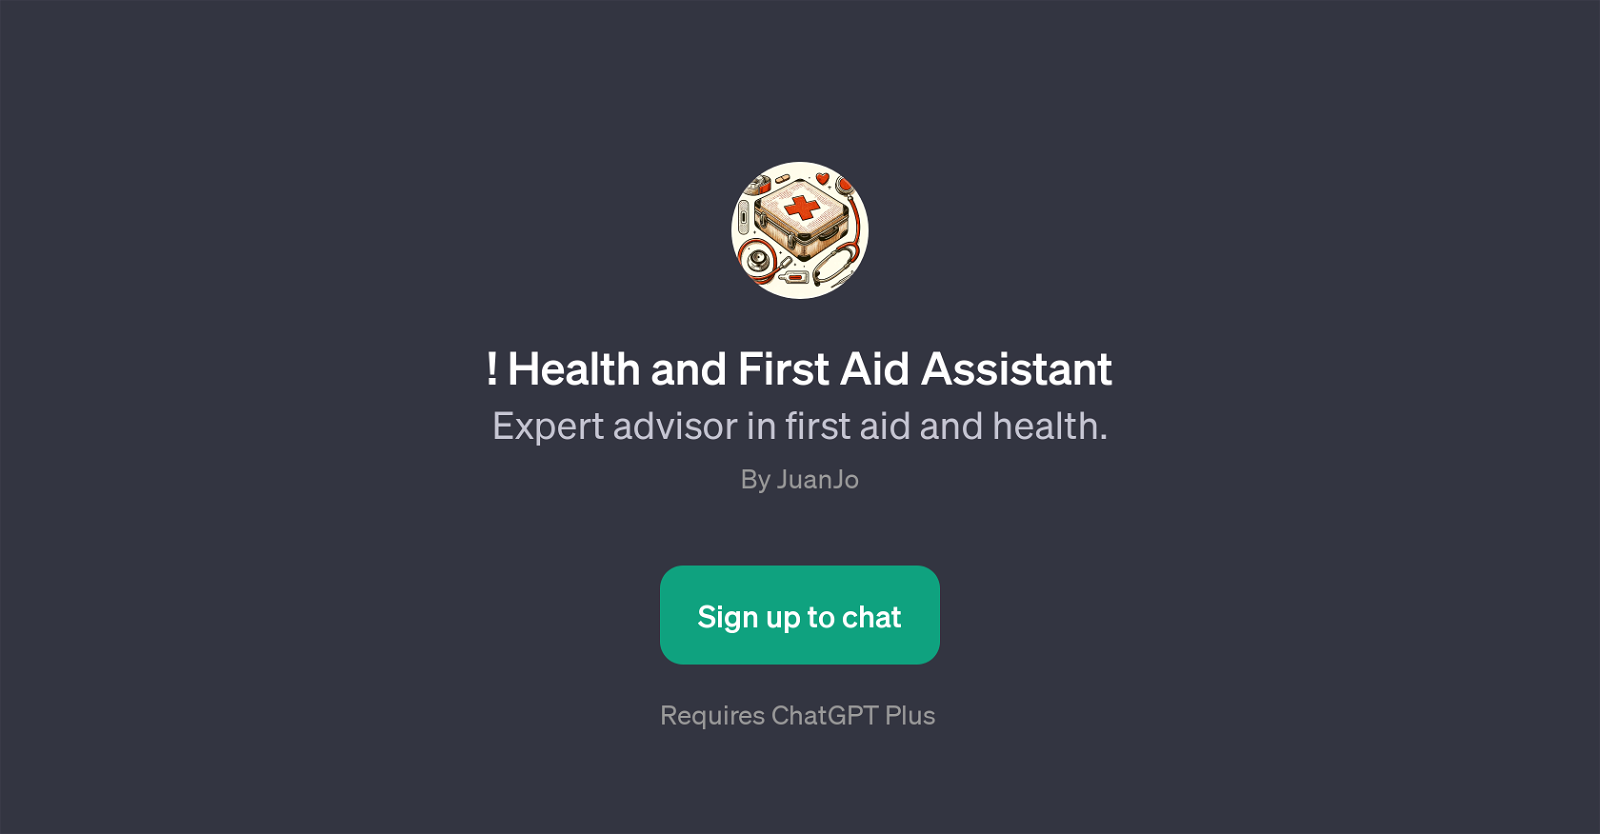 ! Health and First Aid Assistant website